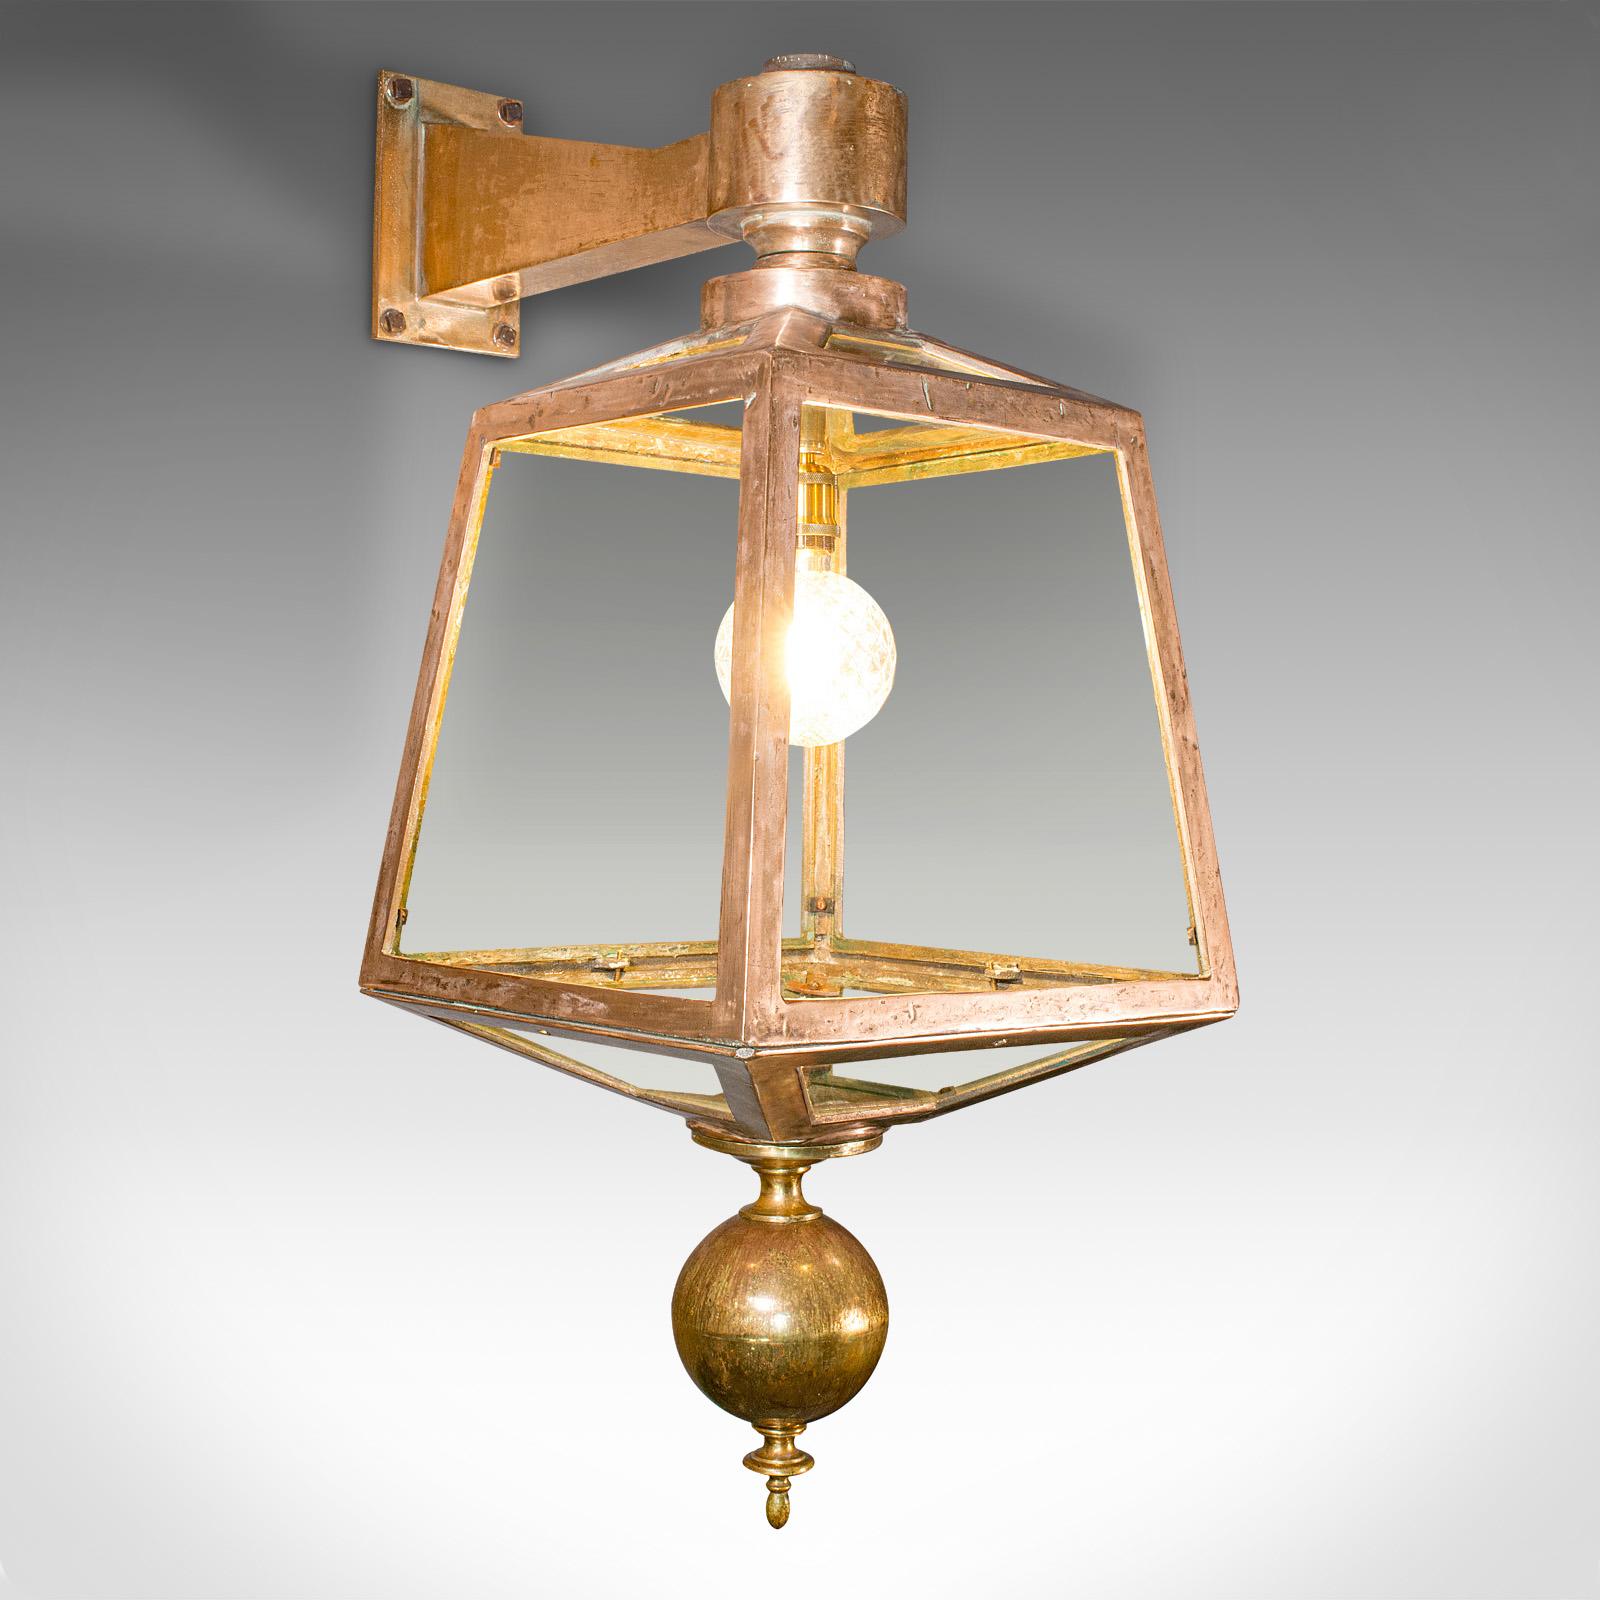 Large Antique Courtyard Light, English, Bronze, Outdoor Lamp, Victorian, C.1870 For Sale 4